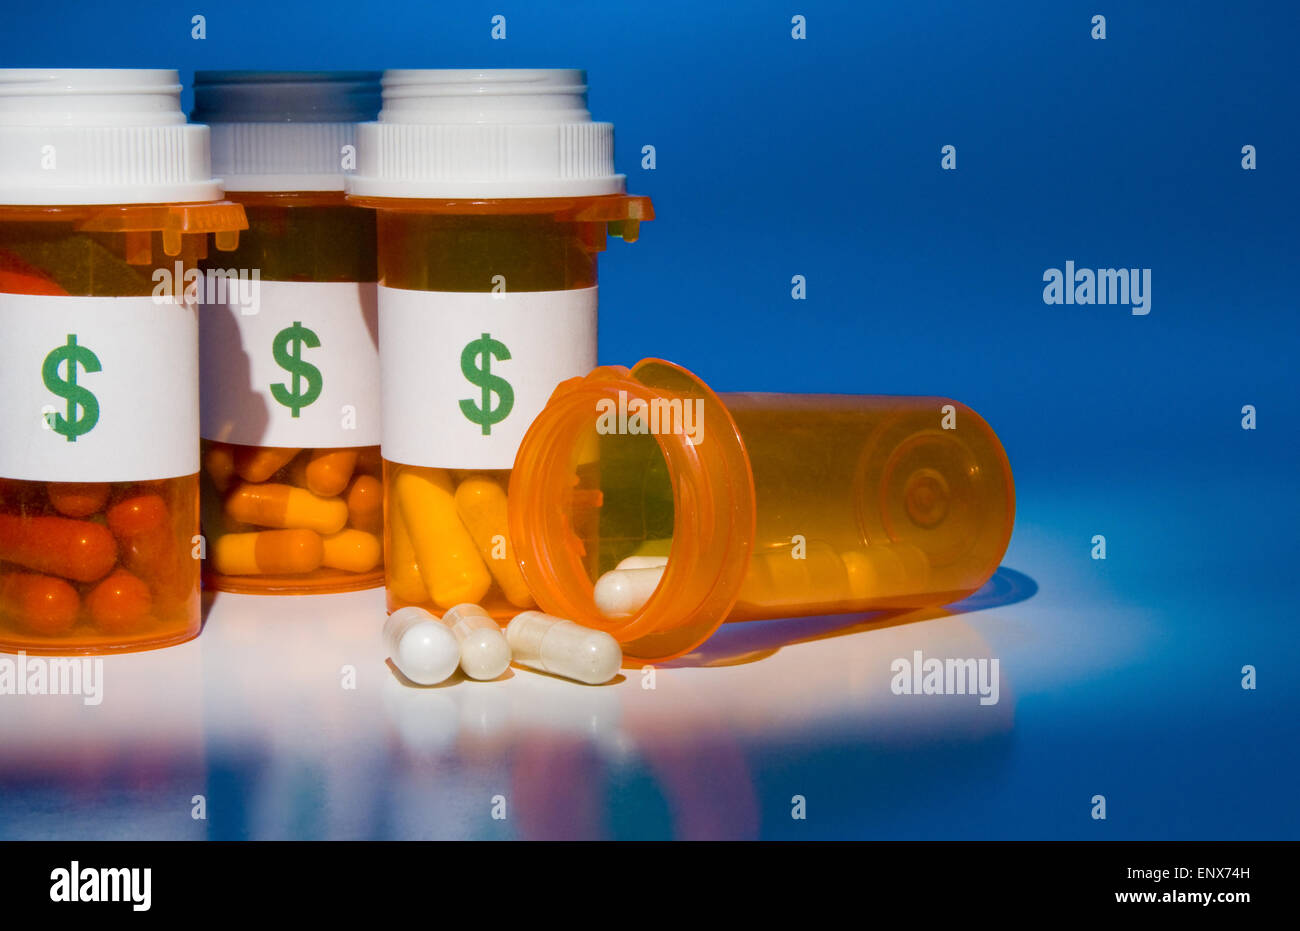 High Cost of Medication Stock Photo